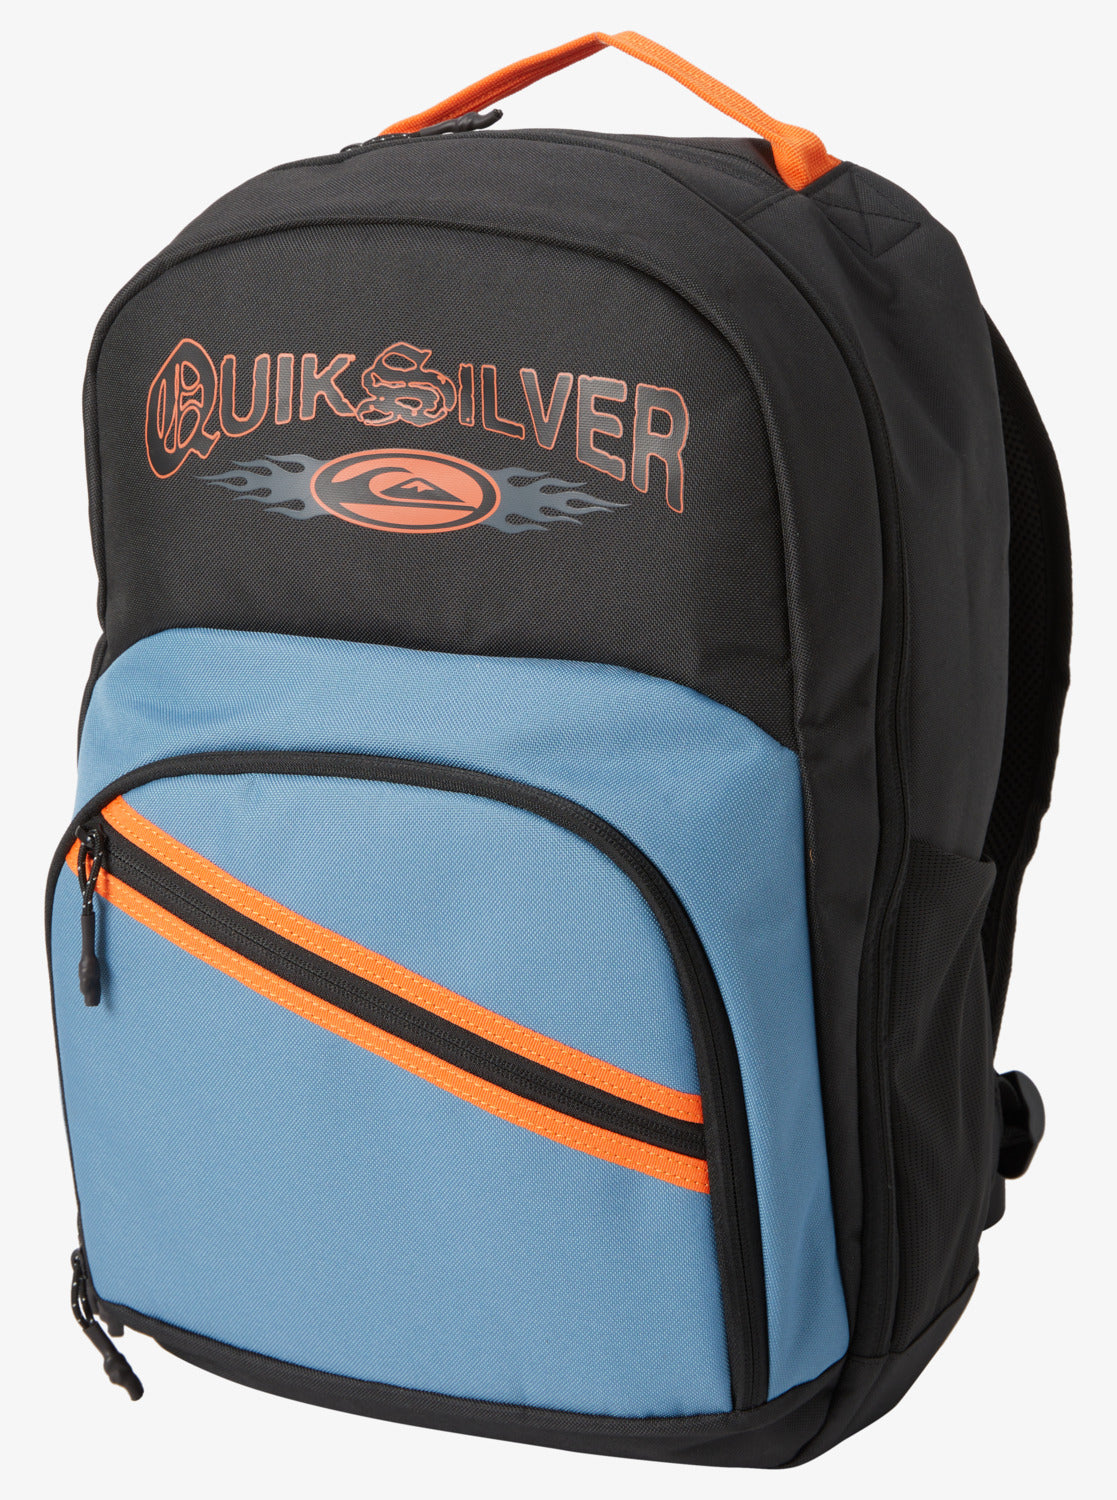 Quiksilver Schoolie Cooler 2.0 Backpack in blue shadow from front